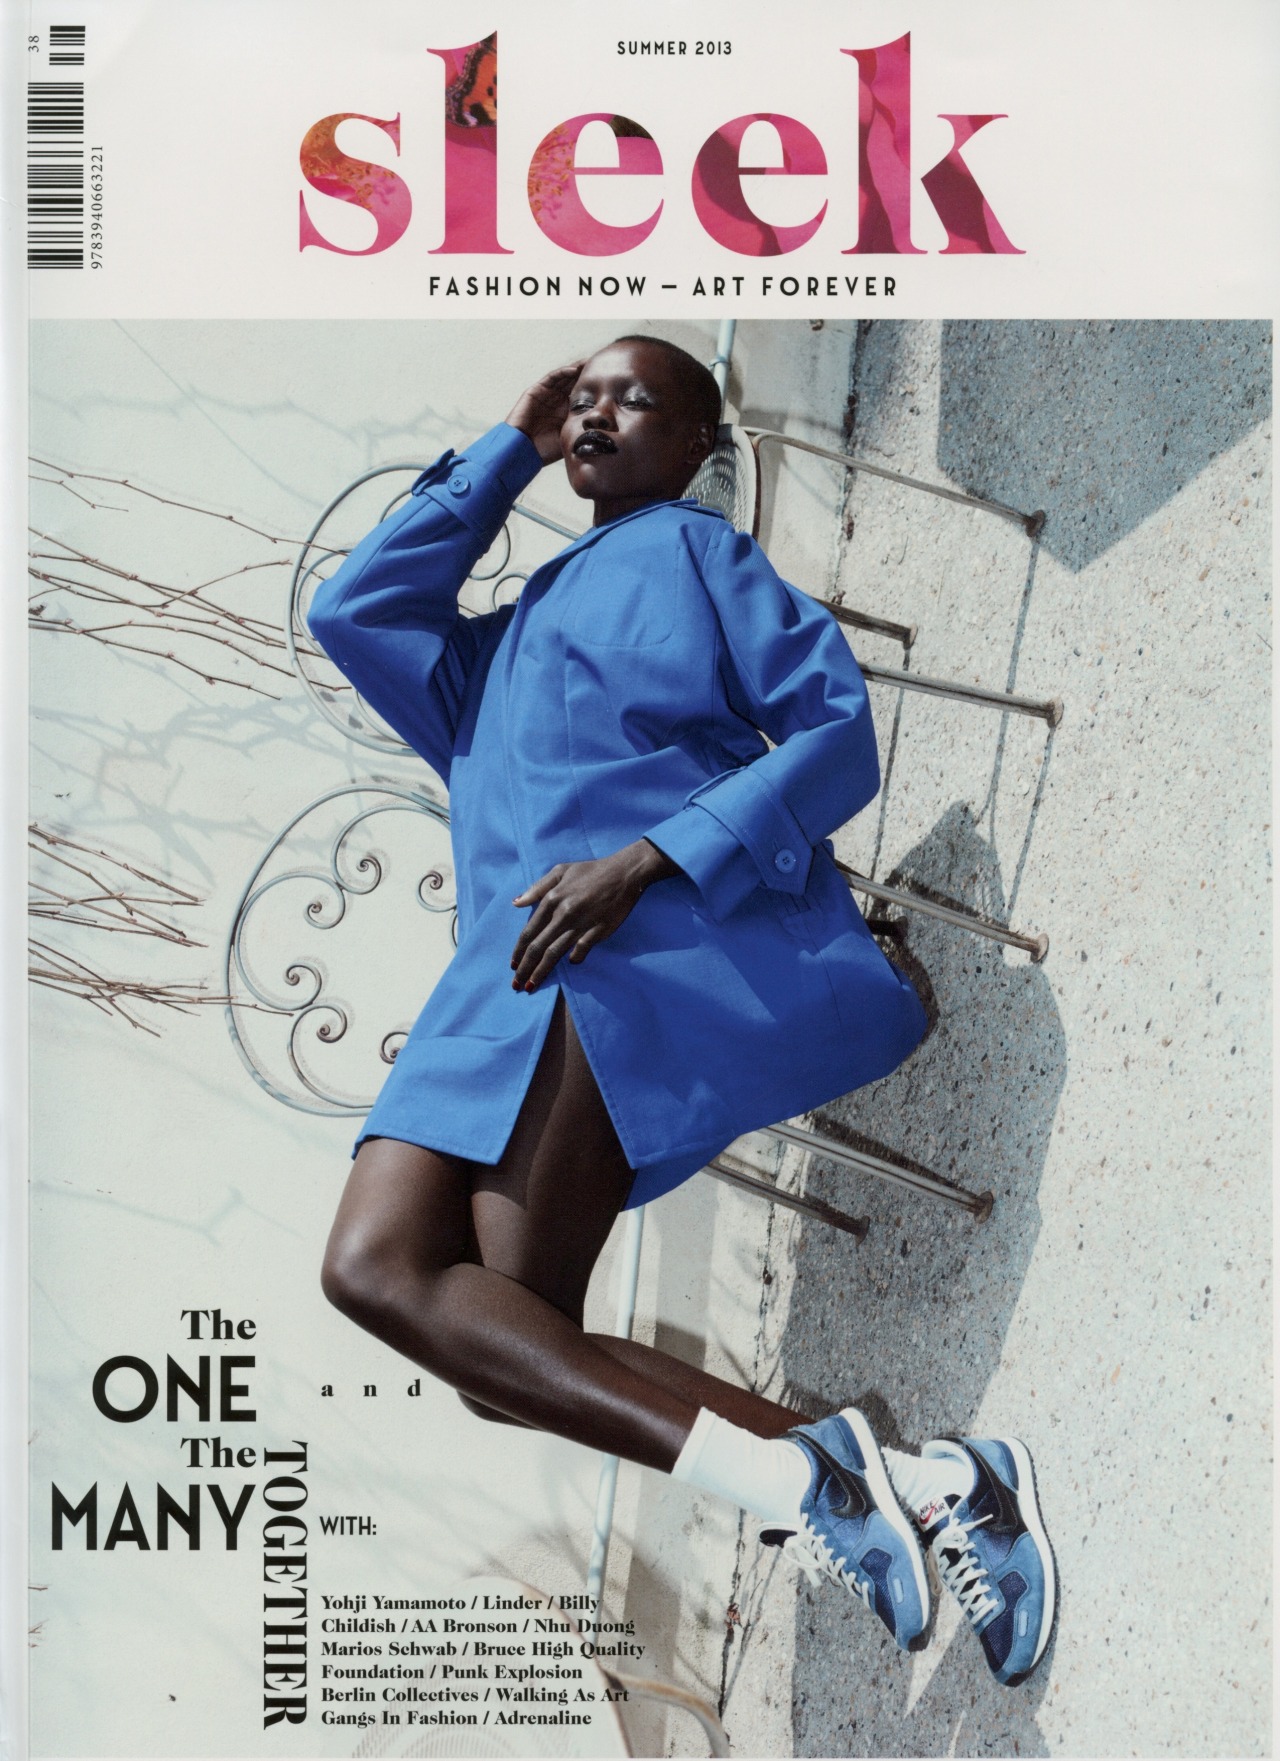 dynamicafrica:  One of my all-time favourite models, Sudanese beauty Grace Bol, stuns